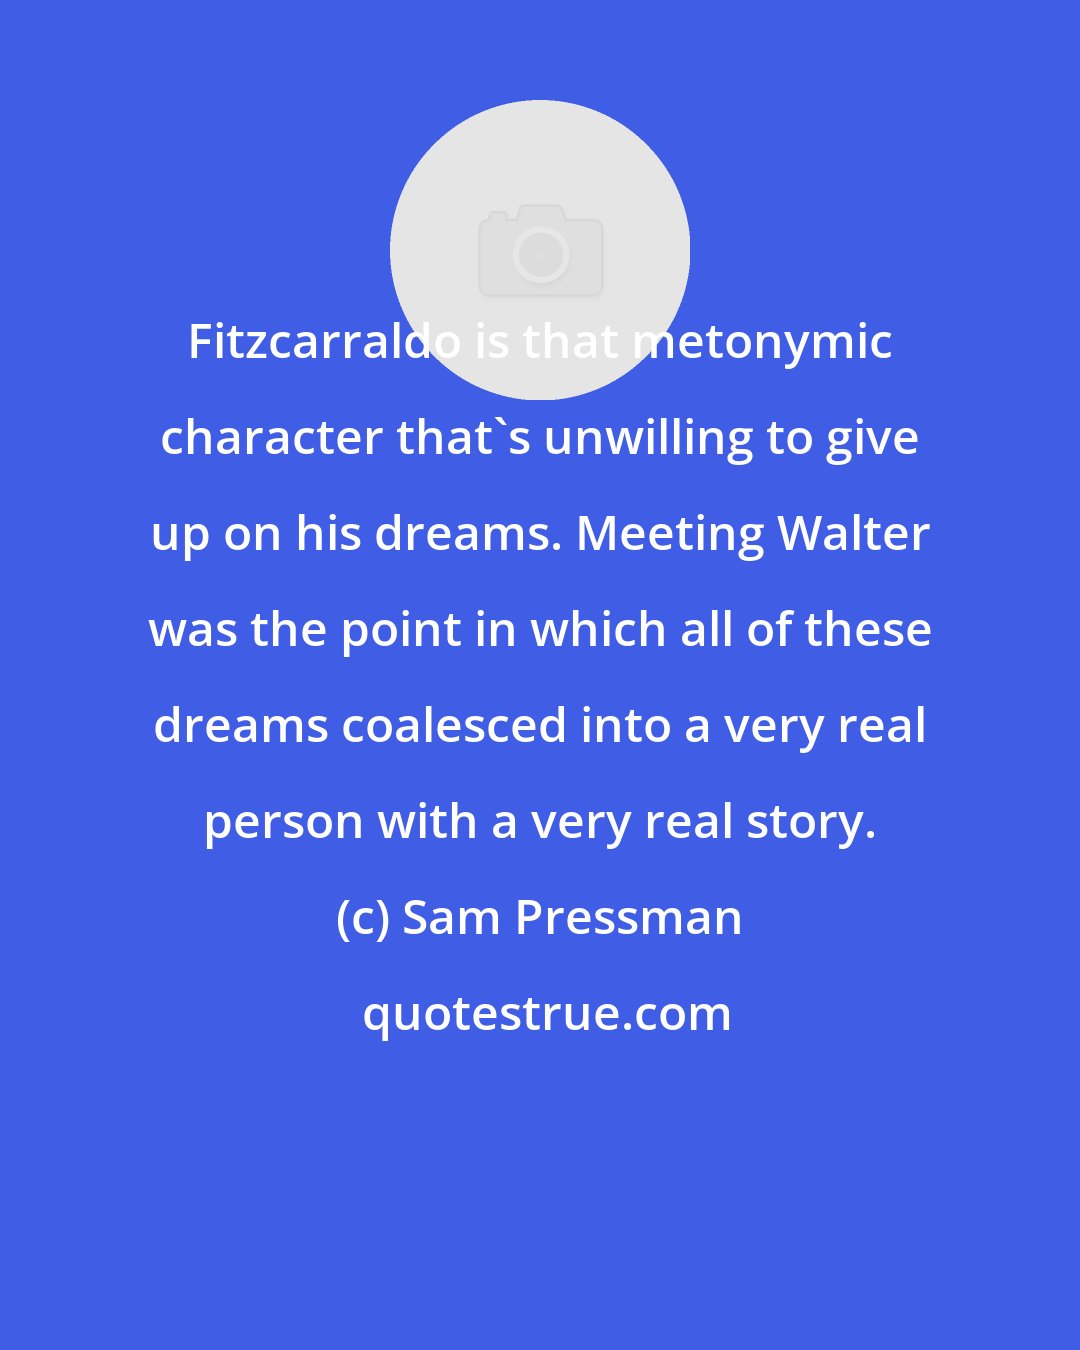 Sam Pressman: Fitzcarraldo is that metonymic character that's unwilling to give up on his dreams. Meeting Walter was the point in which all of these dreams coalesced into a very real person with a very real story.